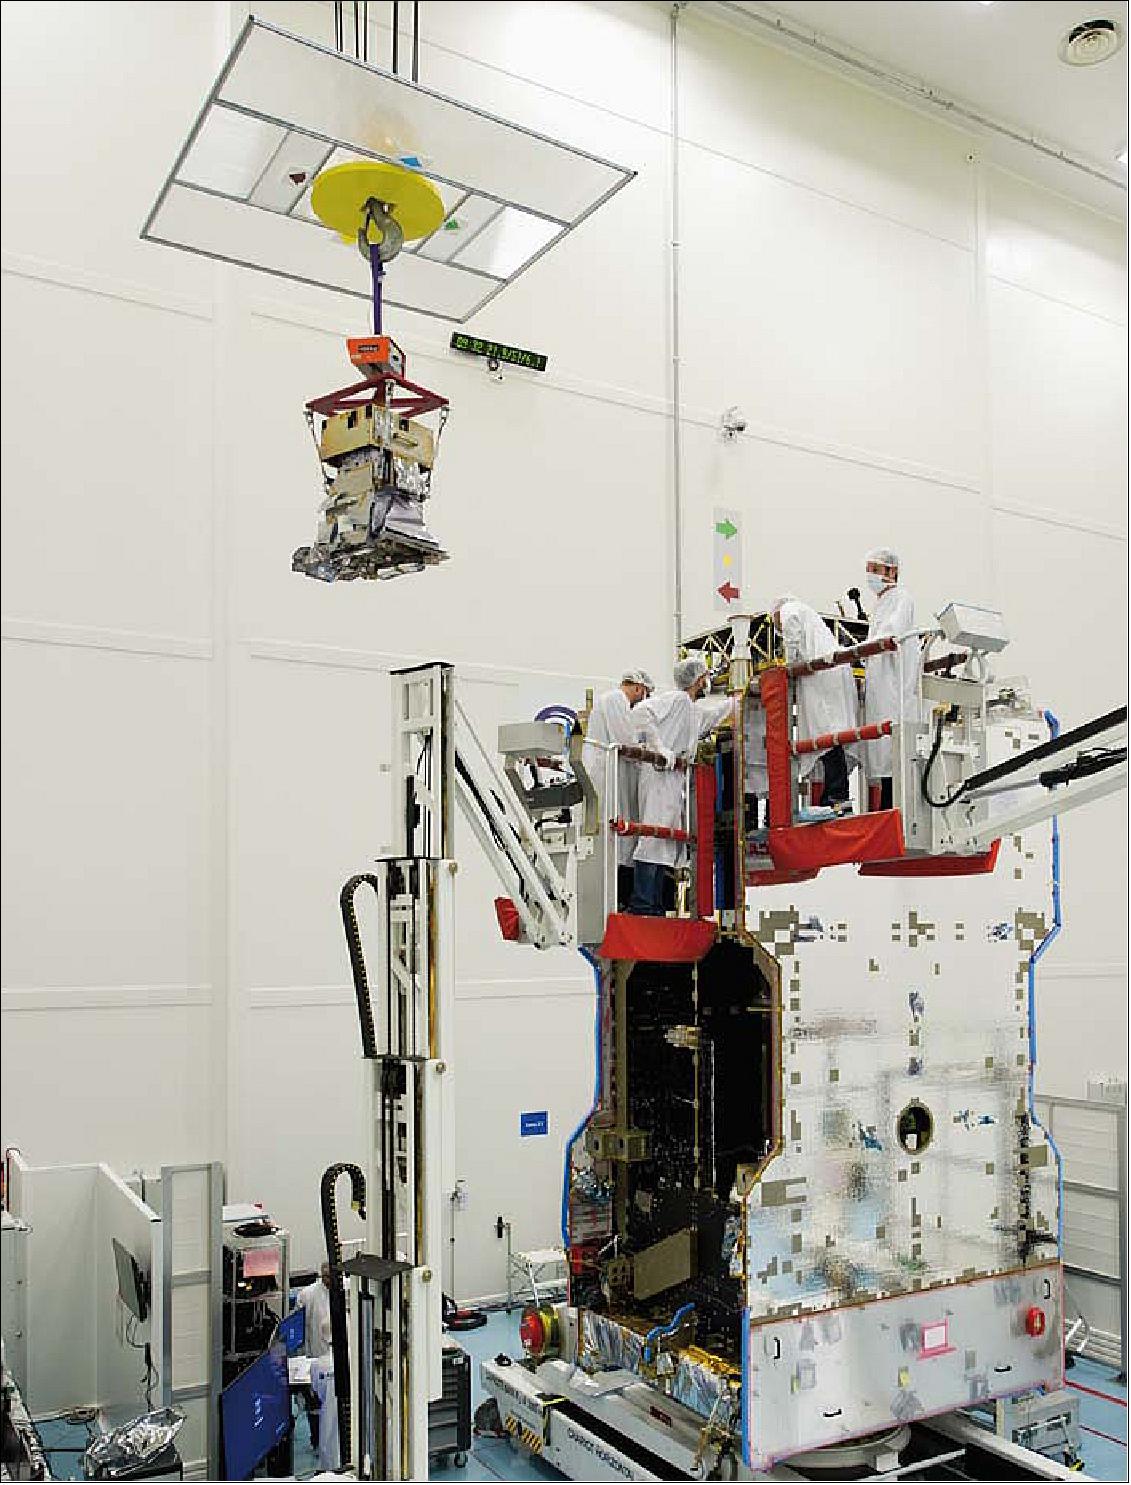 Figure 7: The GOLD instrument is hoisted up and installed onto the SES-14 commercial communications satellite, which is being assembled at Airbus Defence and Space in Toulouse, France (image credit: Airbus DS)